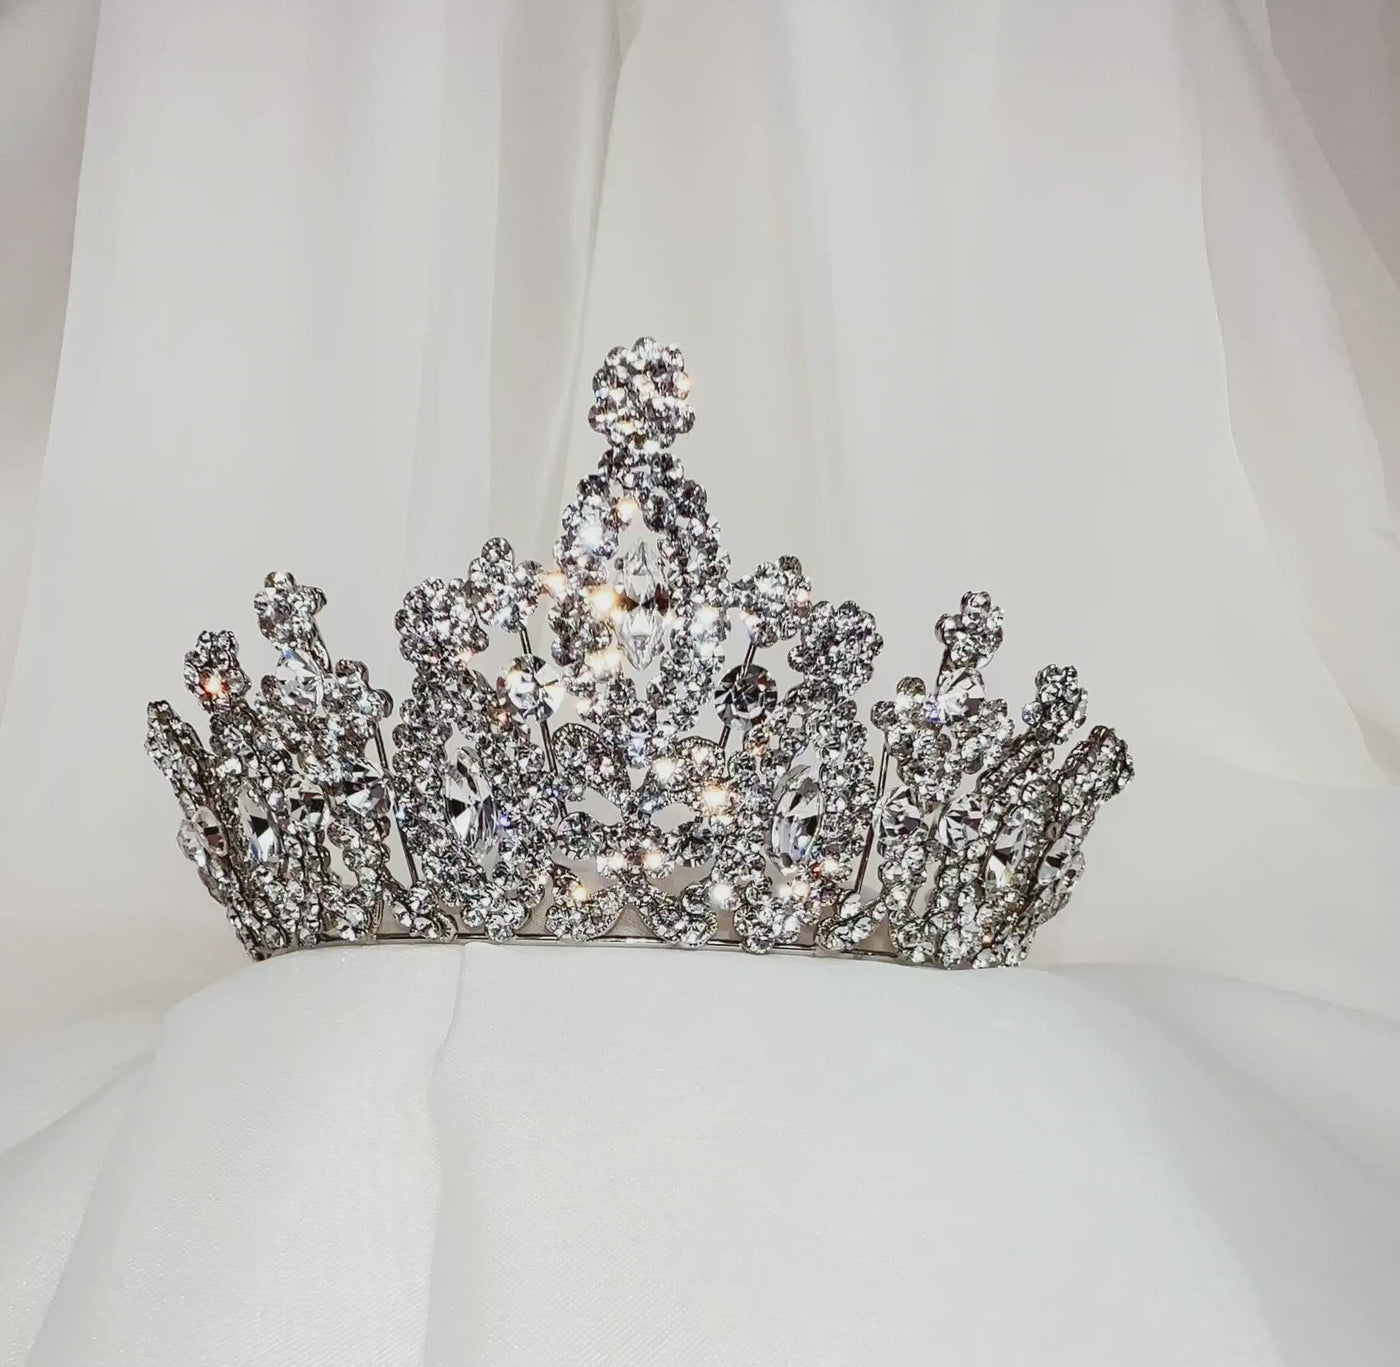 tall bridal crown with round crystal peaks and sparkling halos